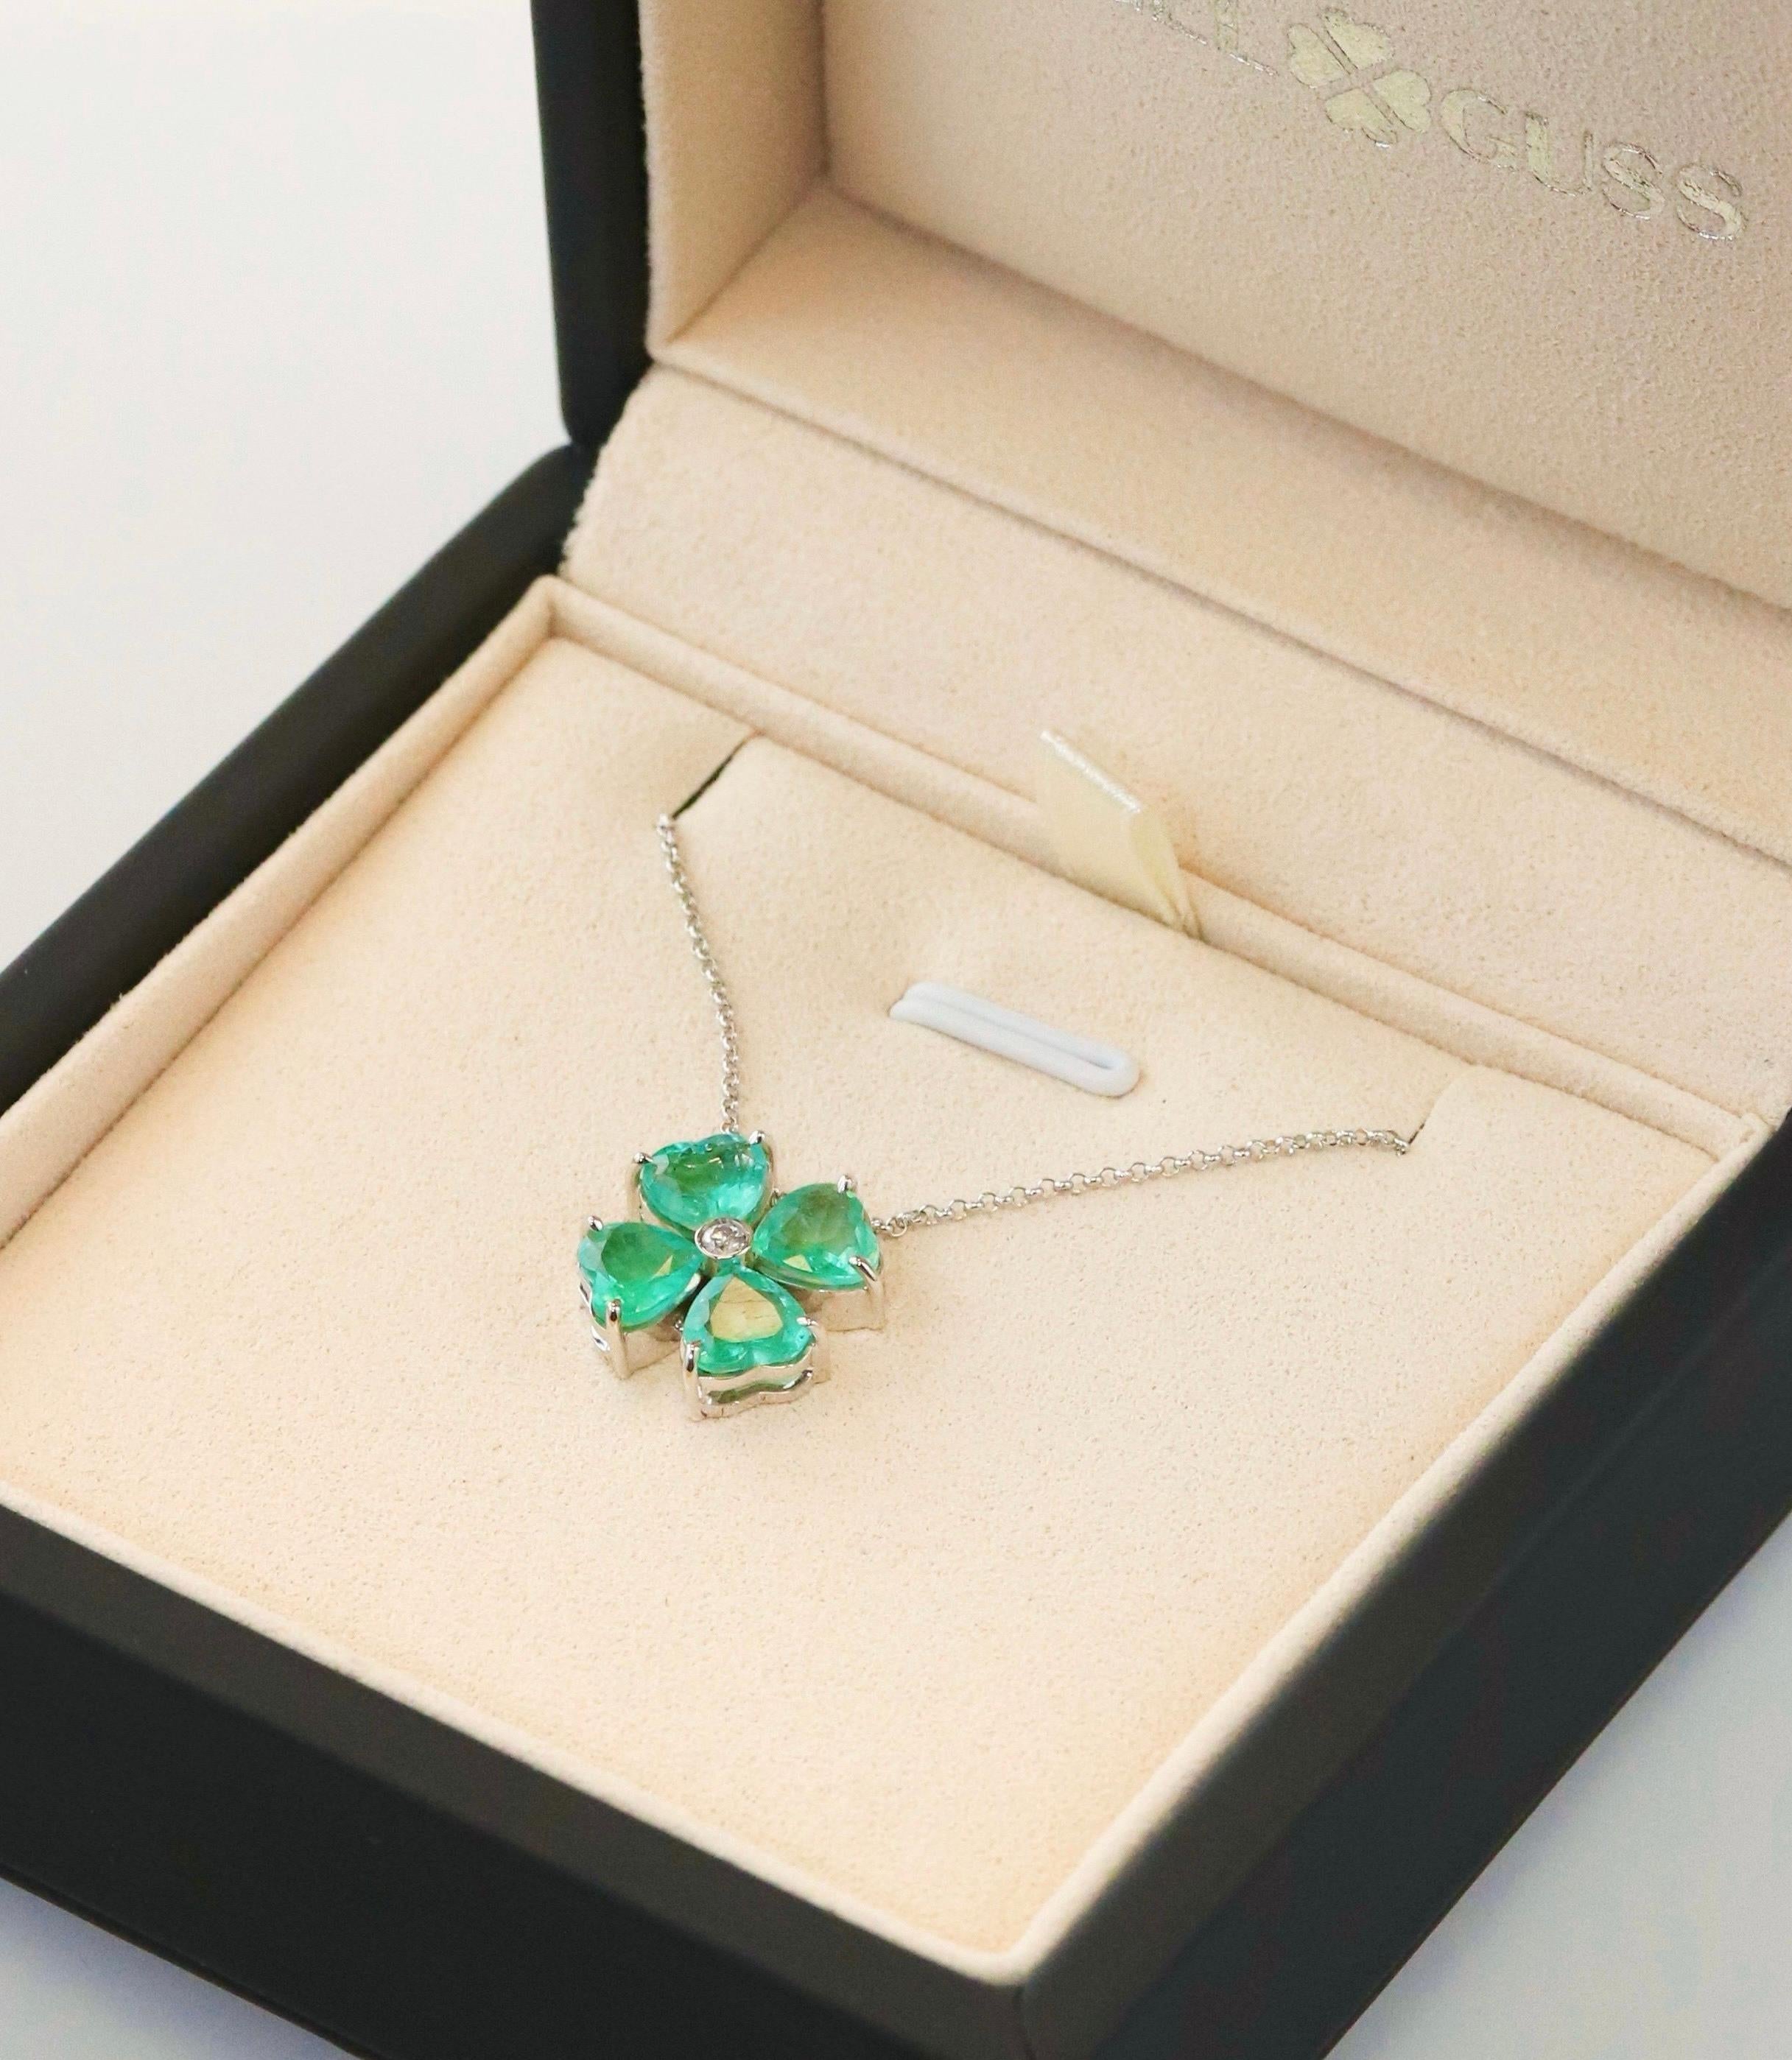 18K Solid White Gold

Natural Emerald Gemstones: Heart Shape, Size 6x6mm each

Natural Diamond

Pendant: Flower Shape 

*The pendant comes with the chain 

*The chain has adjustable length


As a part of The Botanical Garden Collection, this